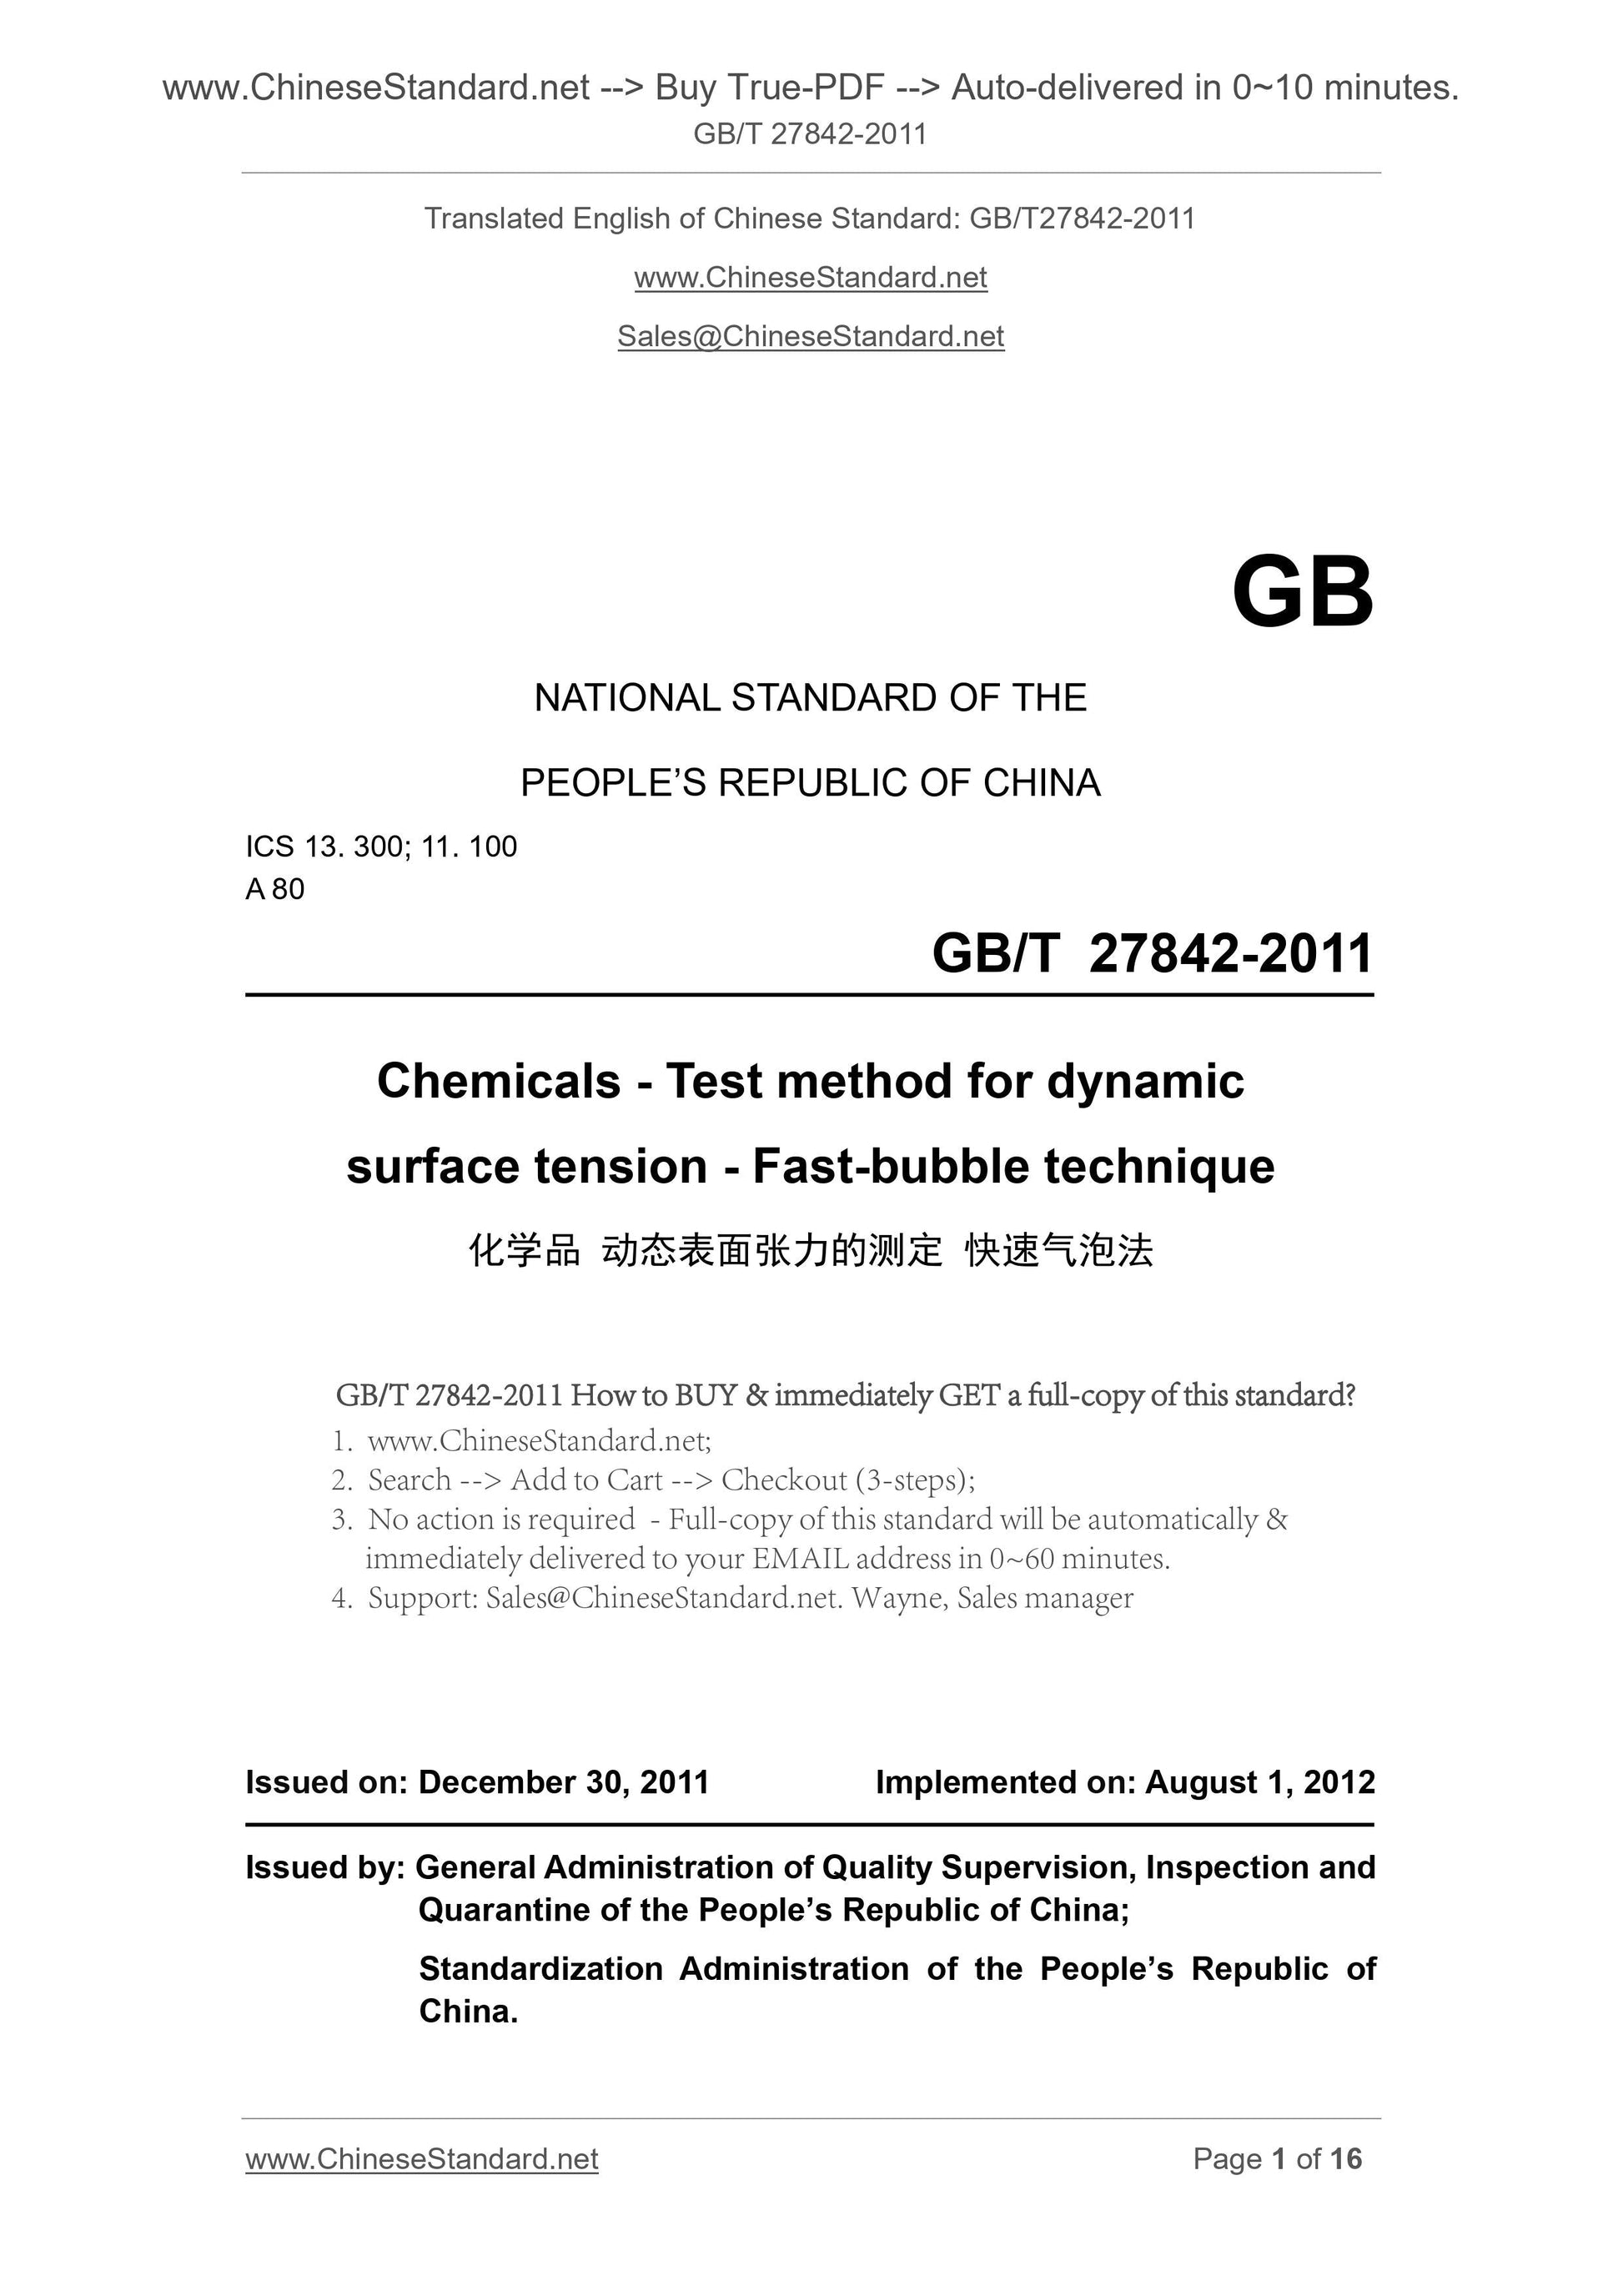 GB/T 27842-2011 Page 1